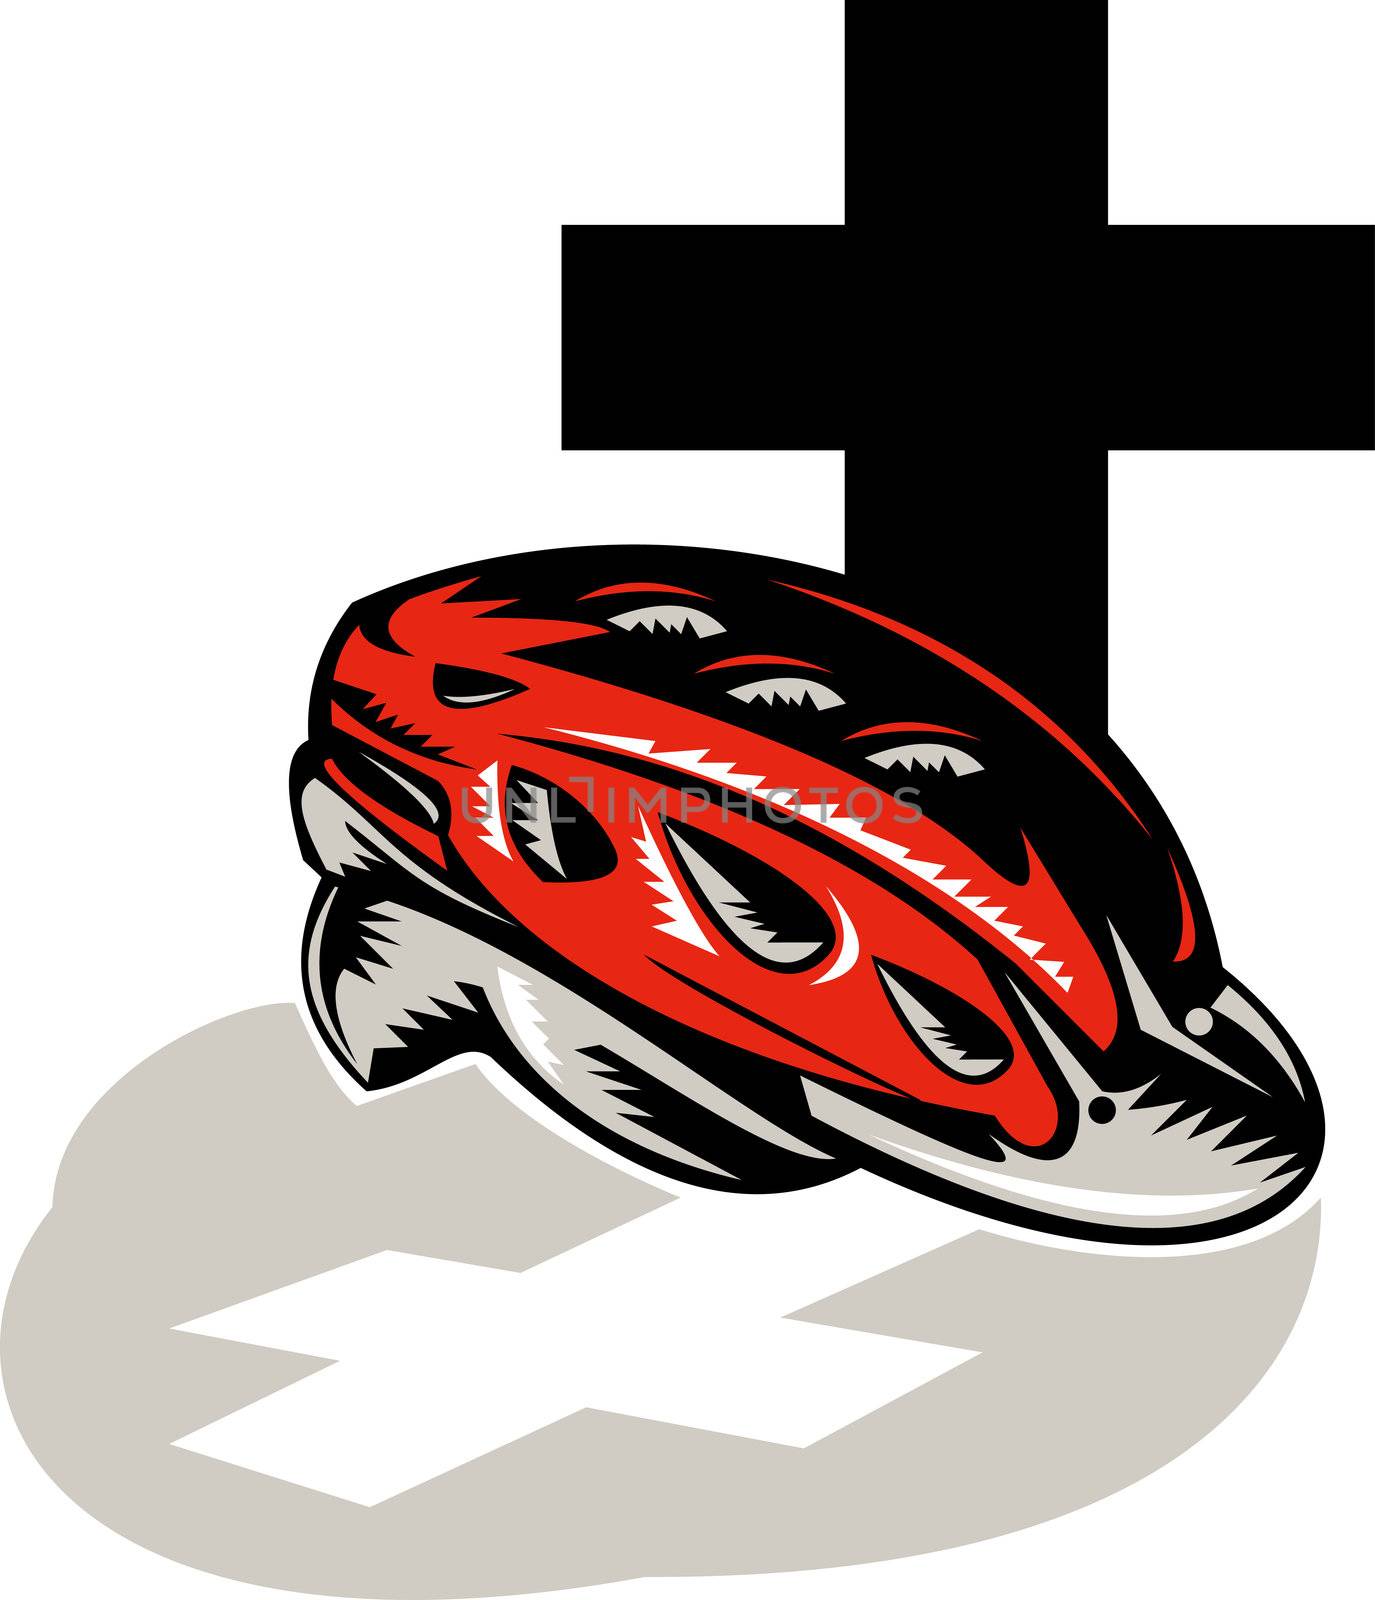 illustration of a cycling crash helmet with cross